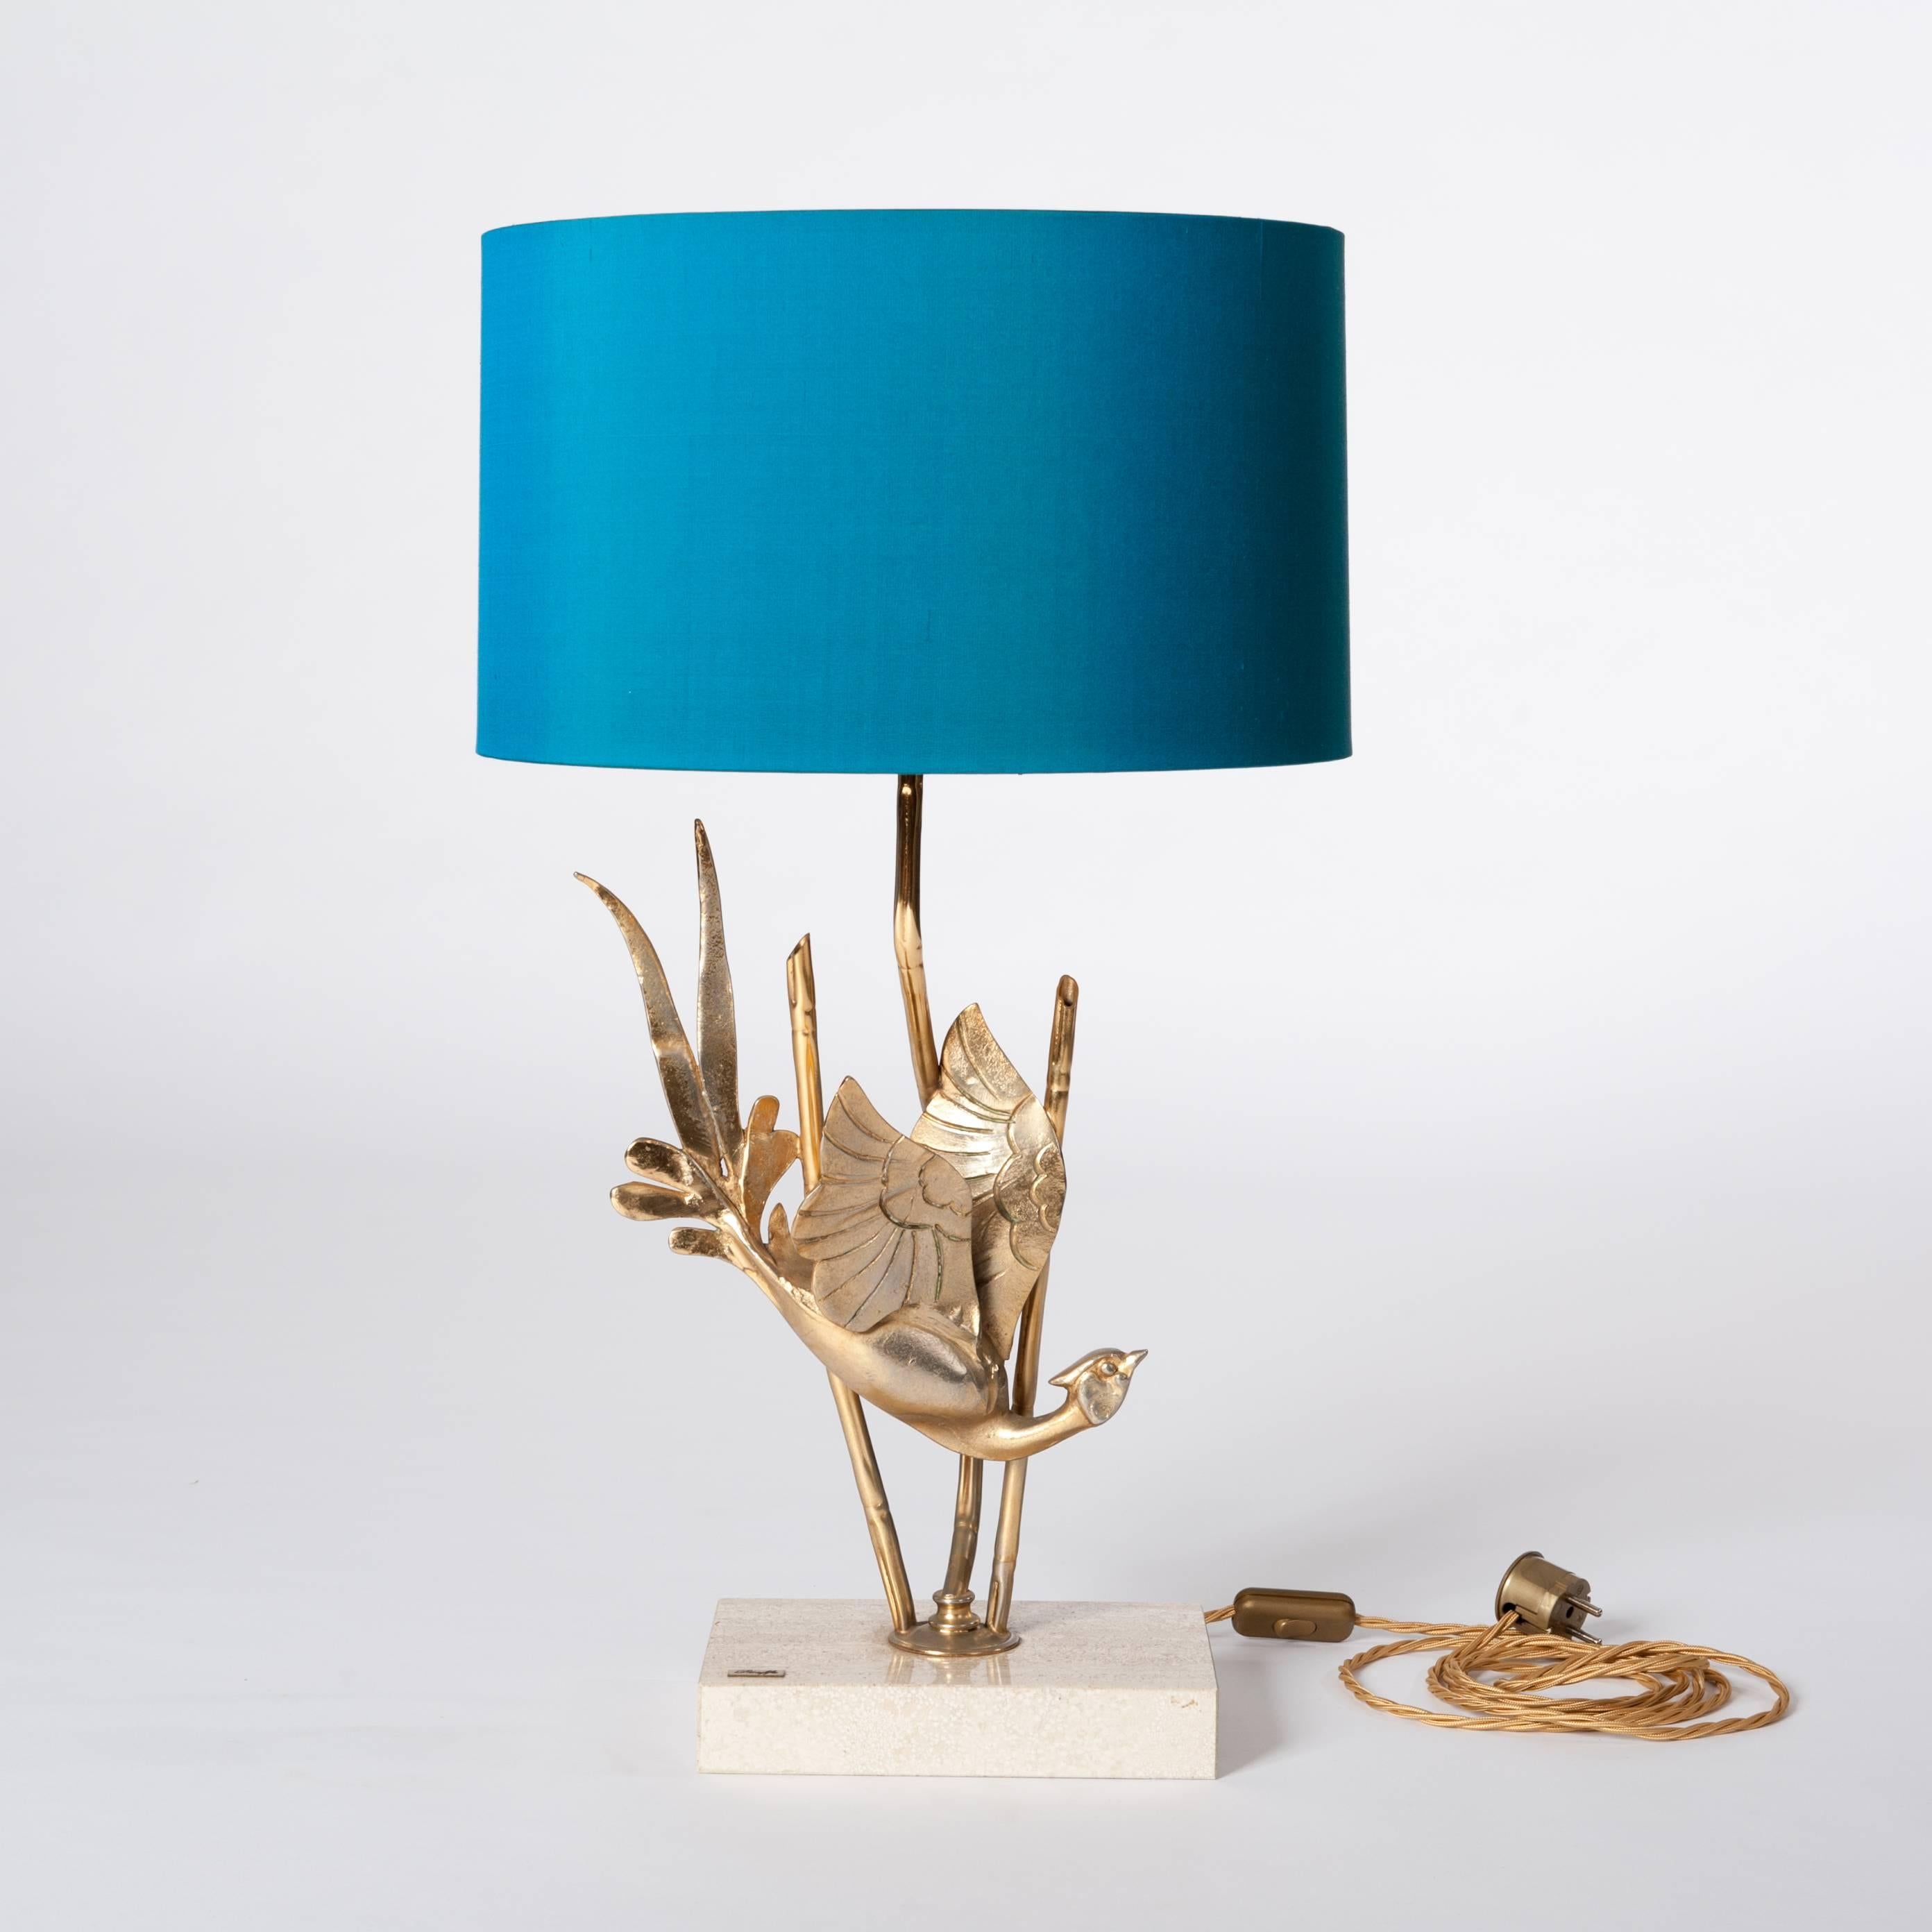 Midcentury Italian brass sculptured - bird in the reeds - table lamp signed Pieffe by a separate label
on the base.
The brass object is fixed on a cream colored marble base (width 22.5cm x depth 16cm x height 4.5cm).
A new round bourette silk